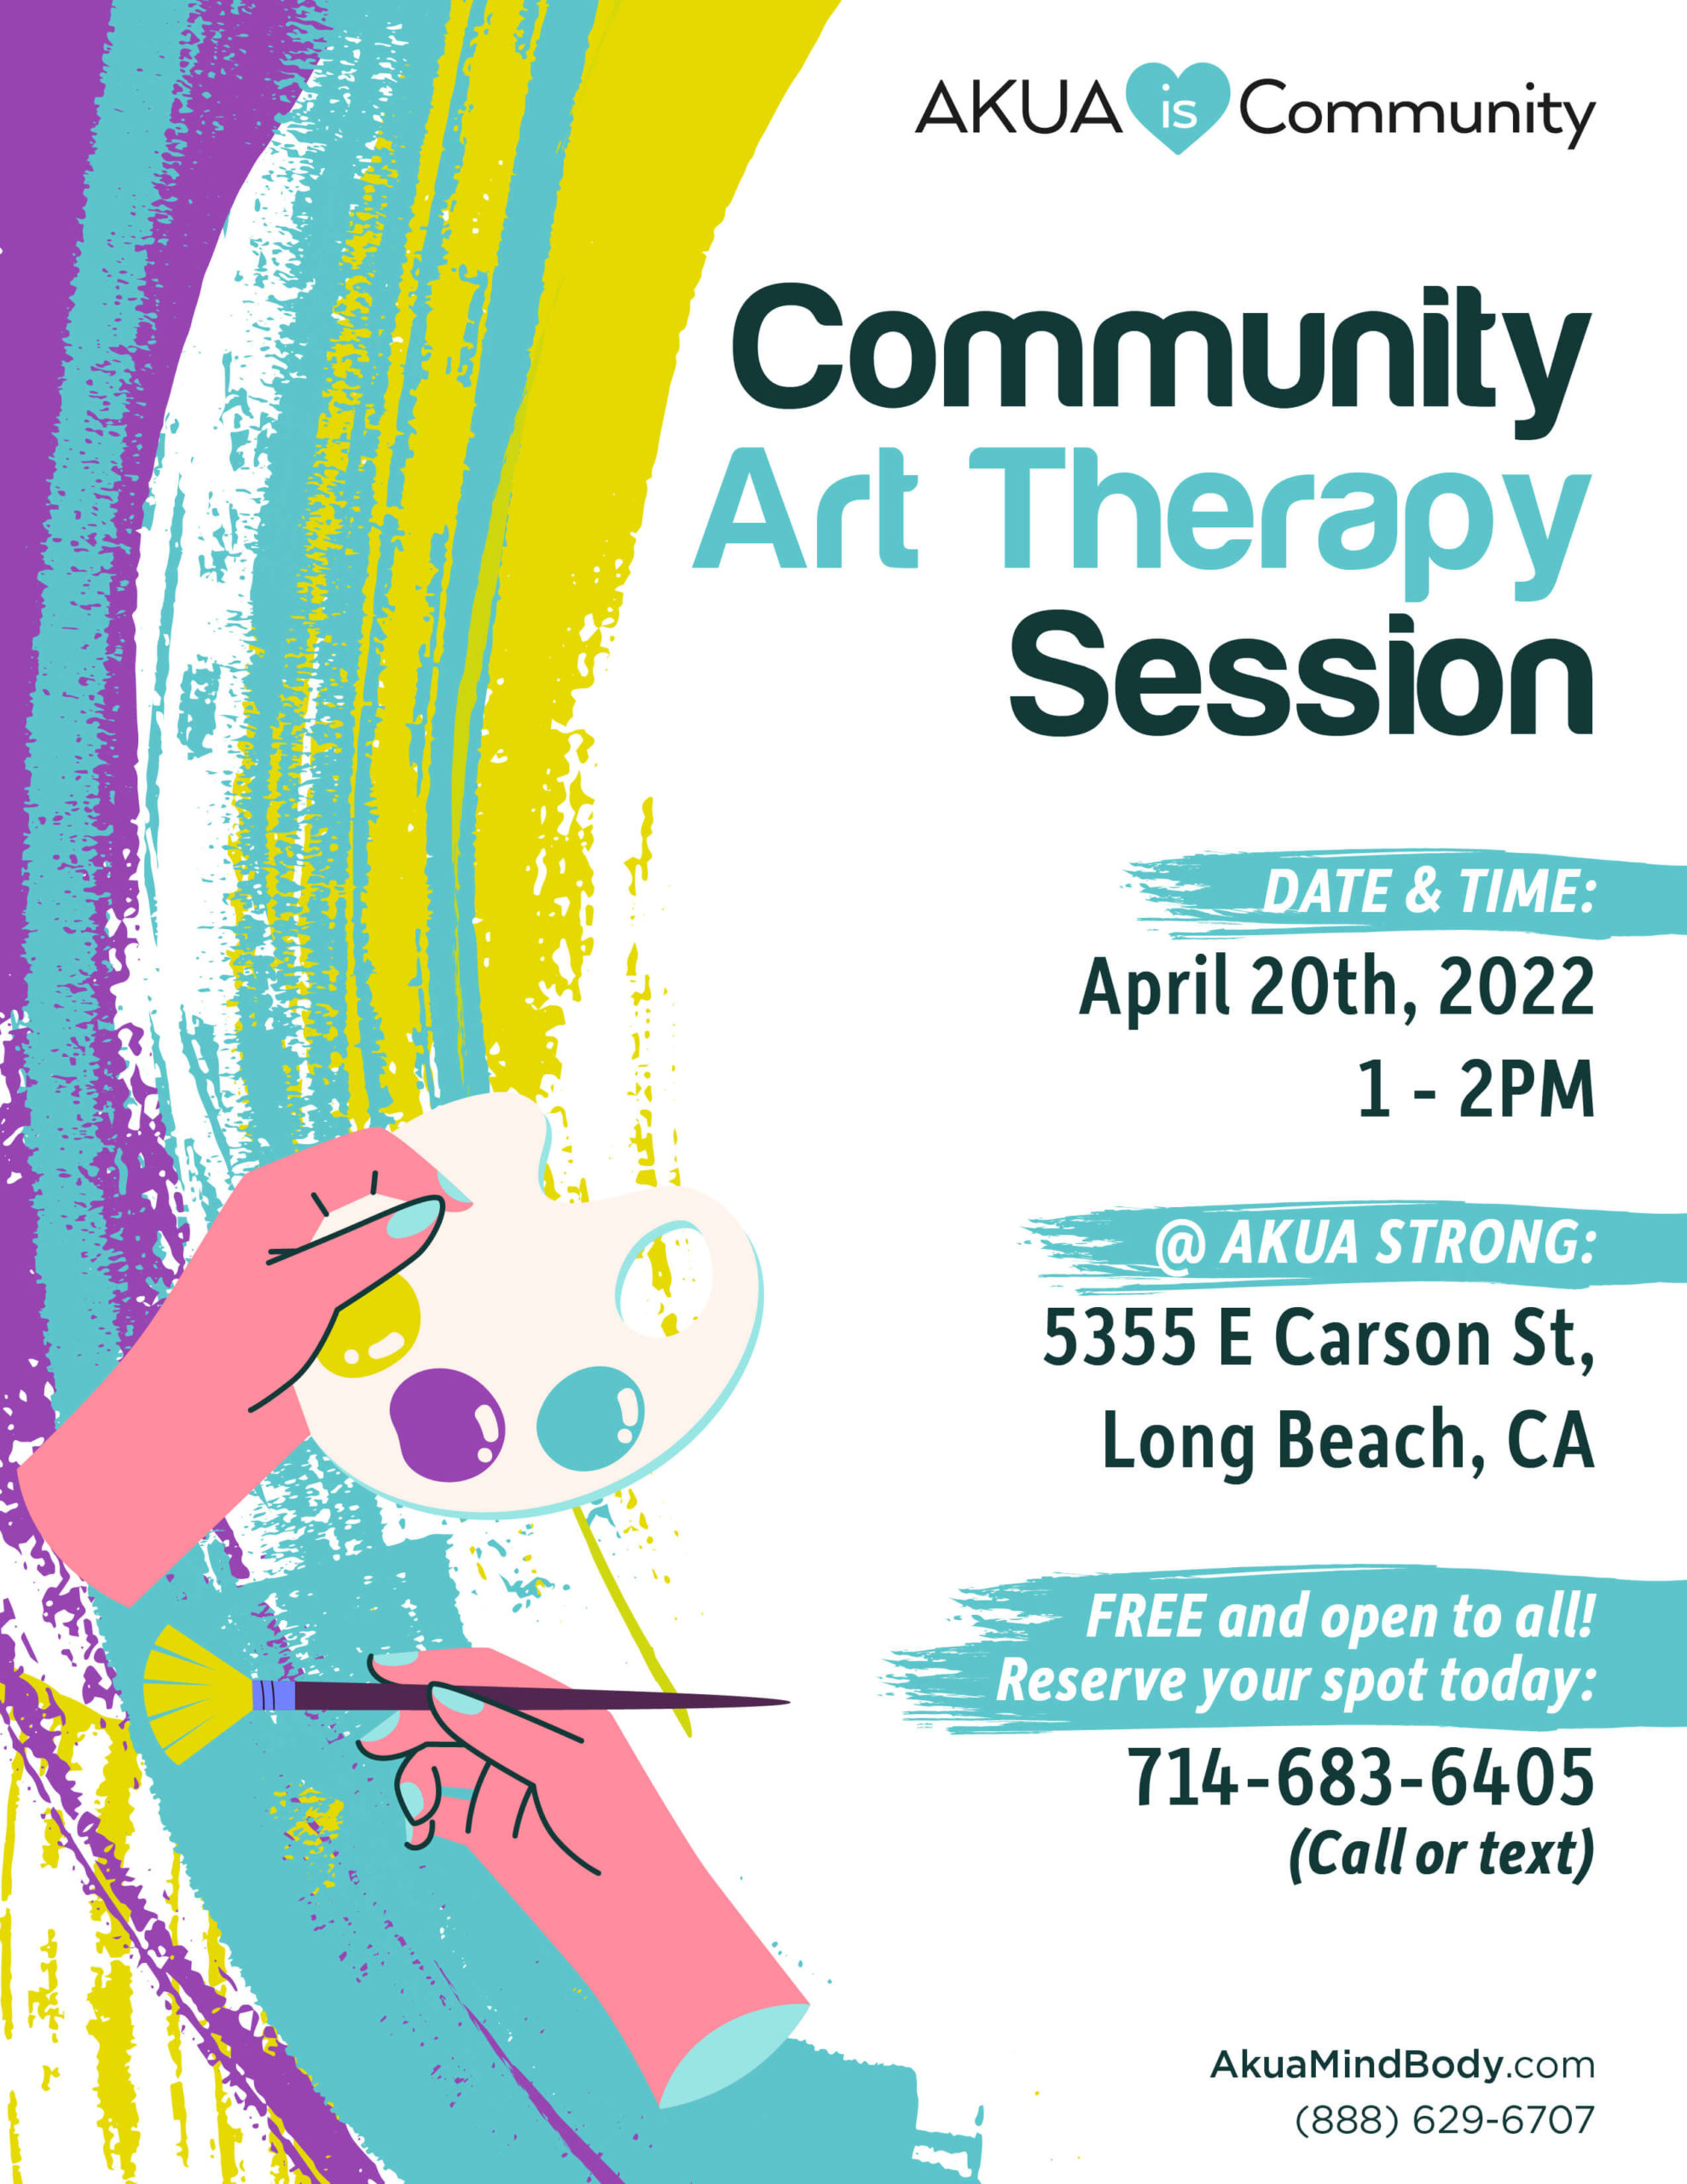 Community-Art-Therapy-Session-scaled.jpg